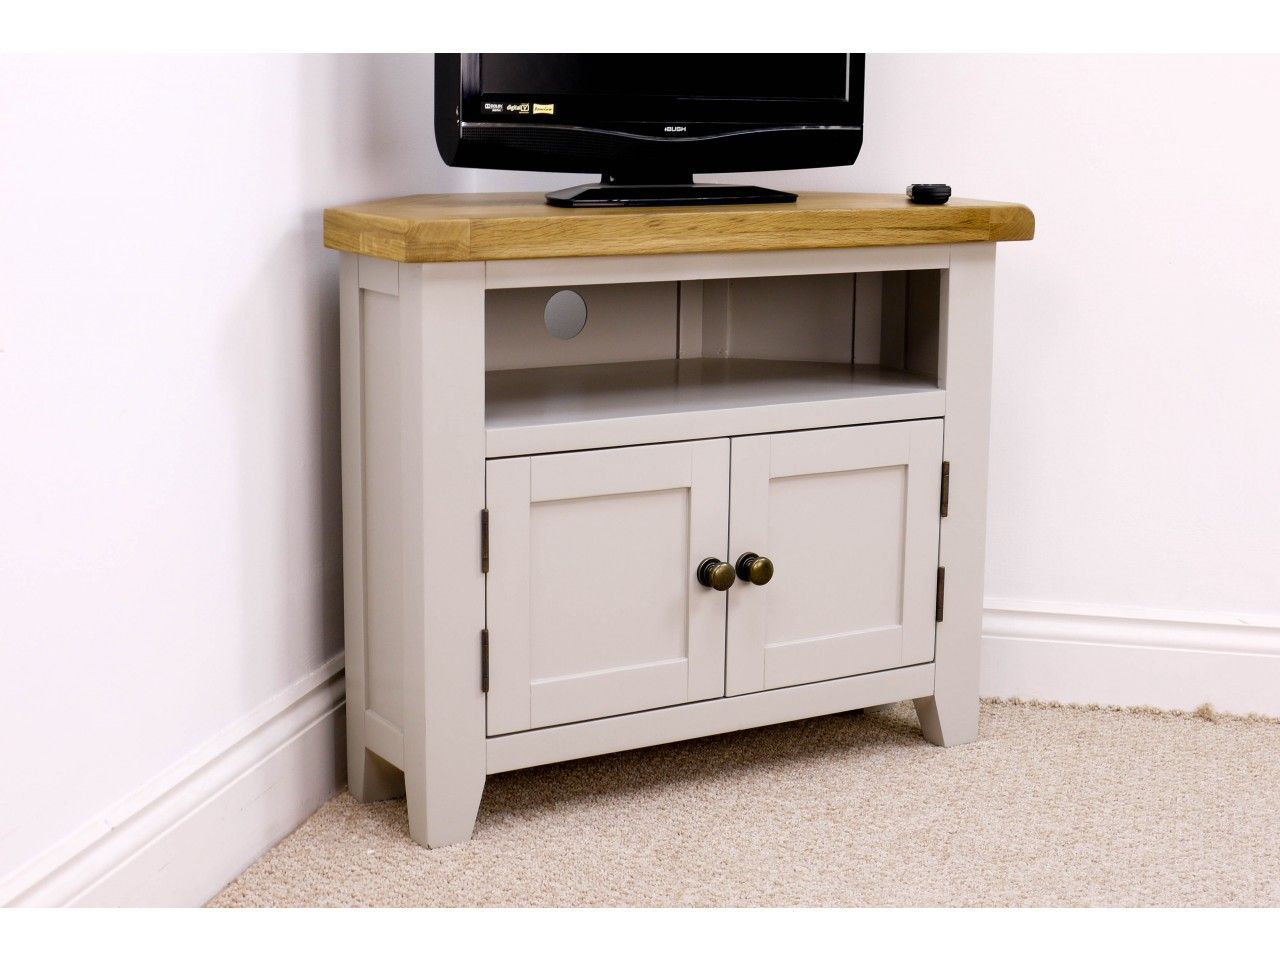 Arklow Painted Oak Corner Tv Unit For Screens Up To 38 Throughout Painted Corner Tv Cabinets (View 4 of 15)